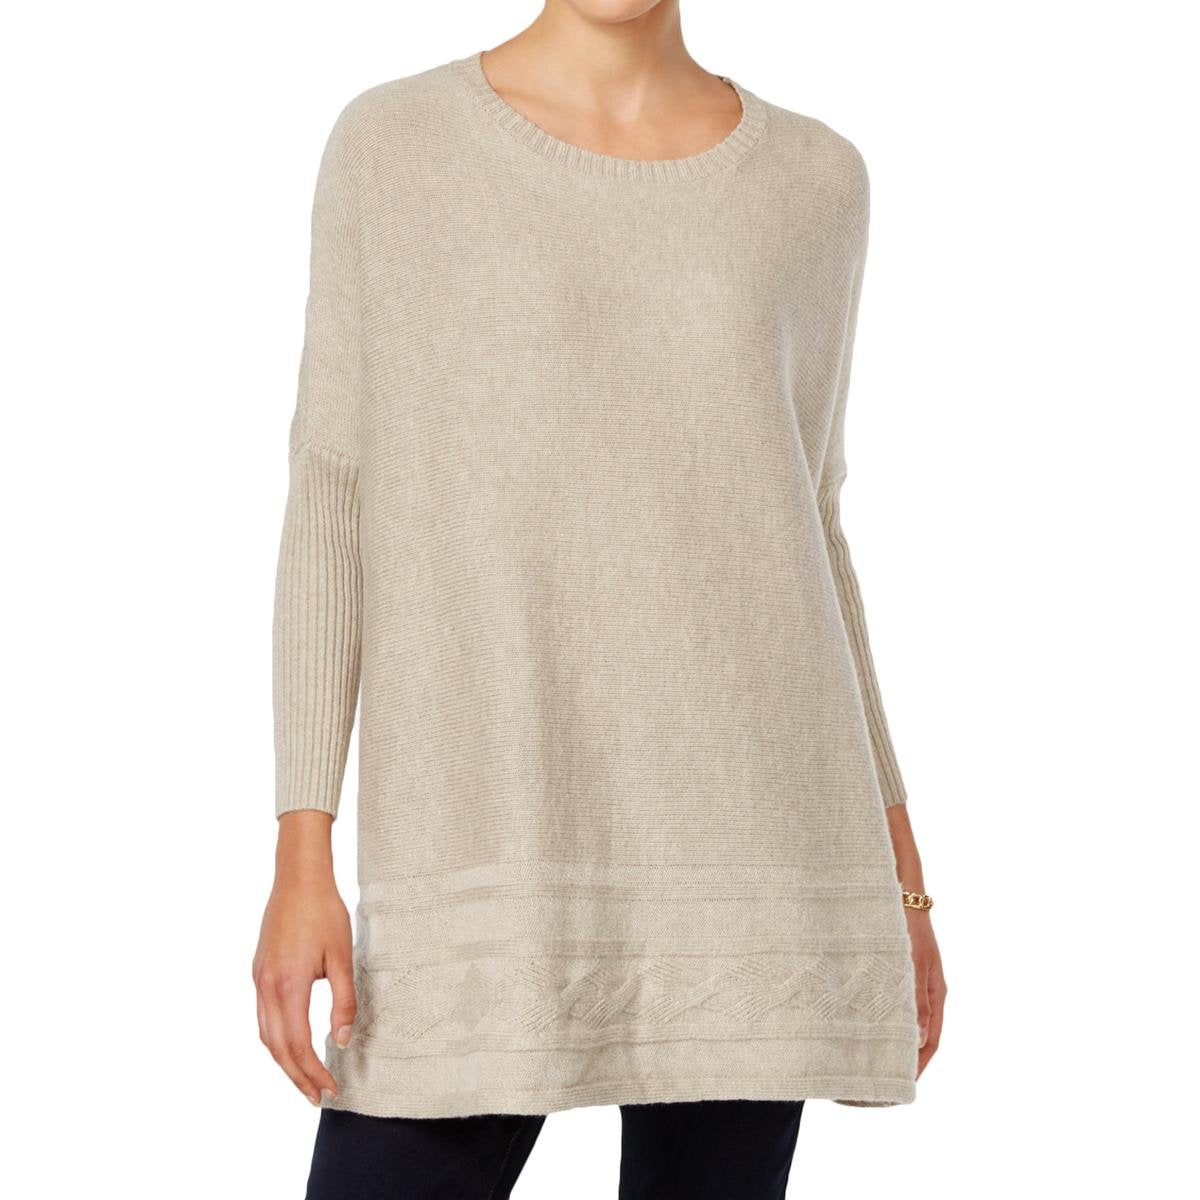 Style & Co. Womens Knit Pullover Sweater Beige PP - Petite